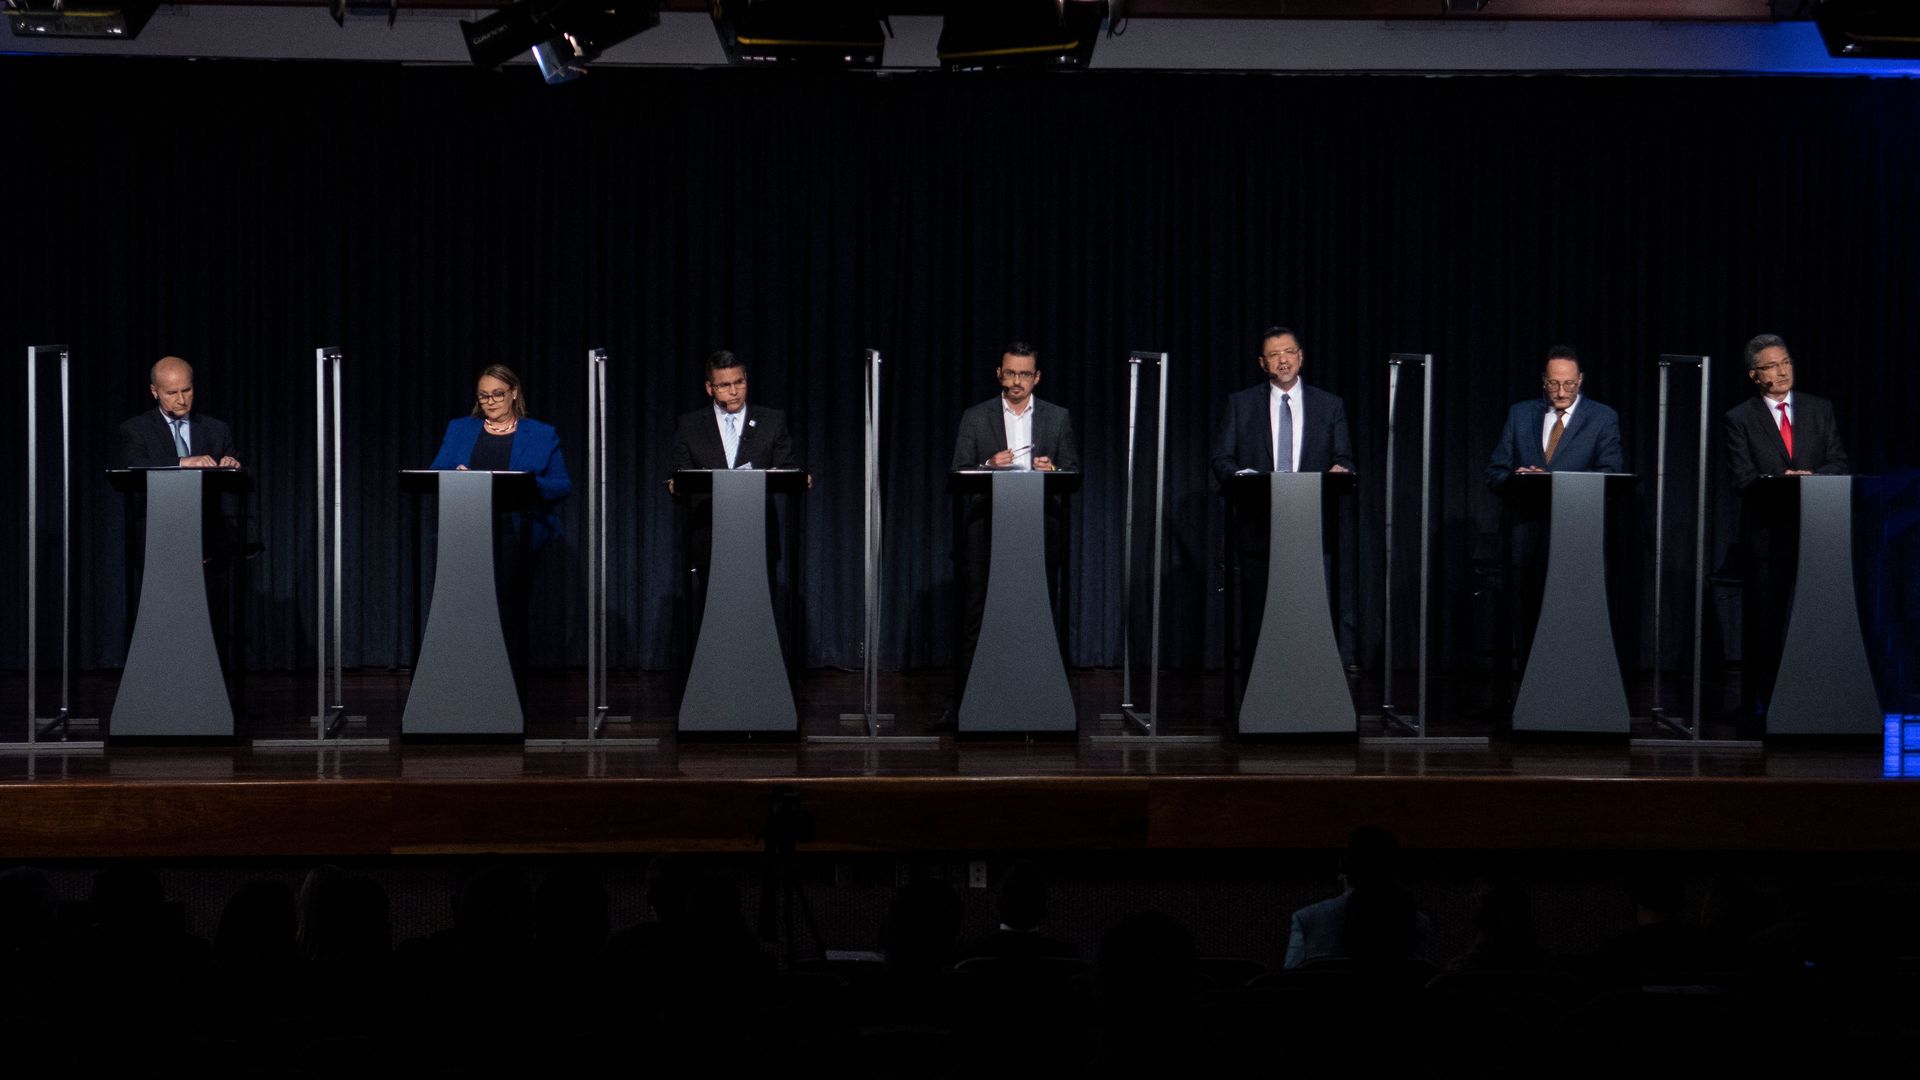 Six men and one woman who are all running for president of Costa Rica stand in front of podiums during a debate in a darkened room with a black background